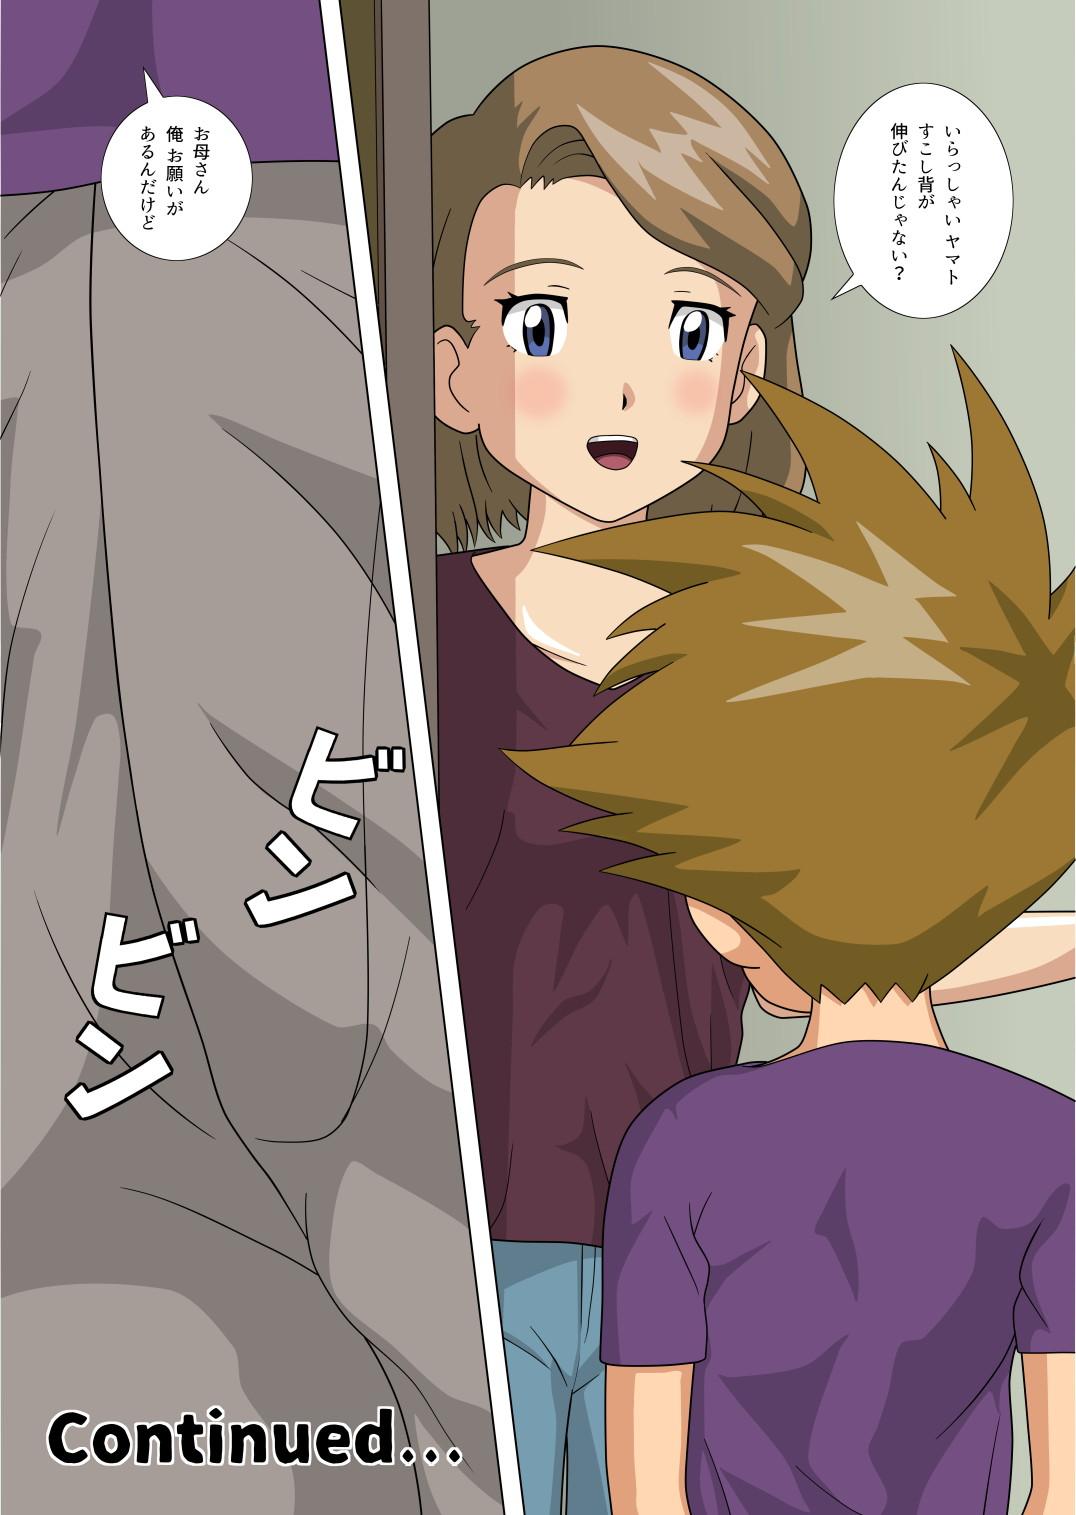 Turkish Friend's mother teaches me how to sex. - Digimon adventure Digimon Ginger - Page 18